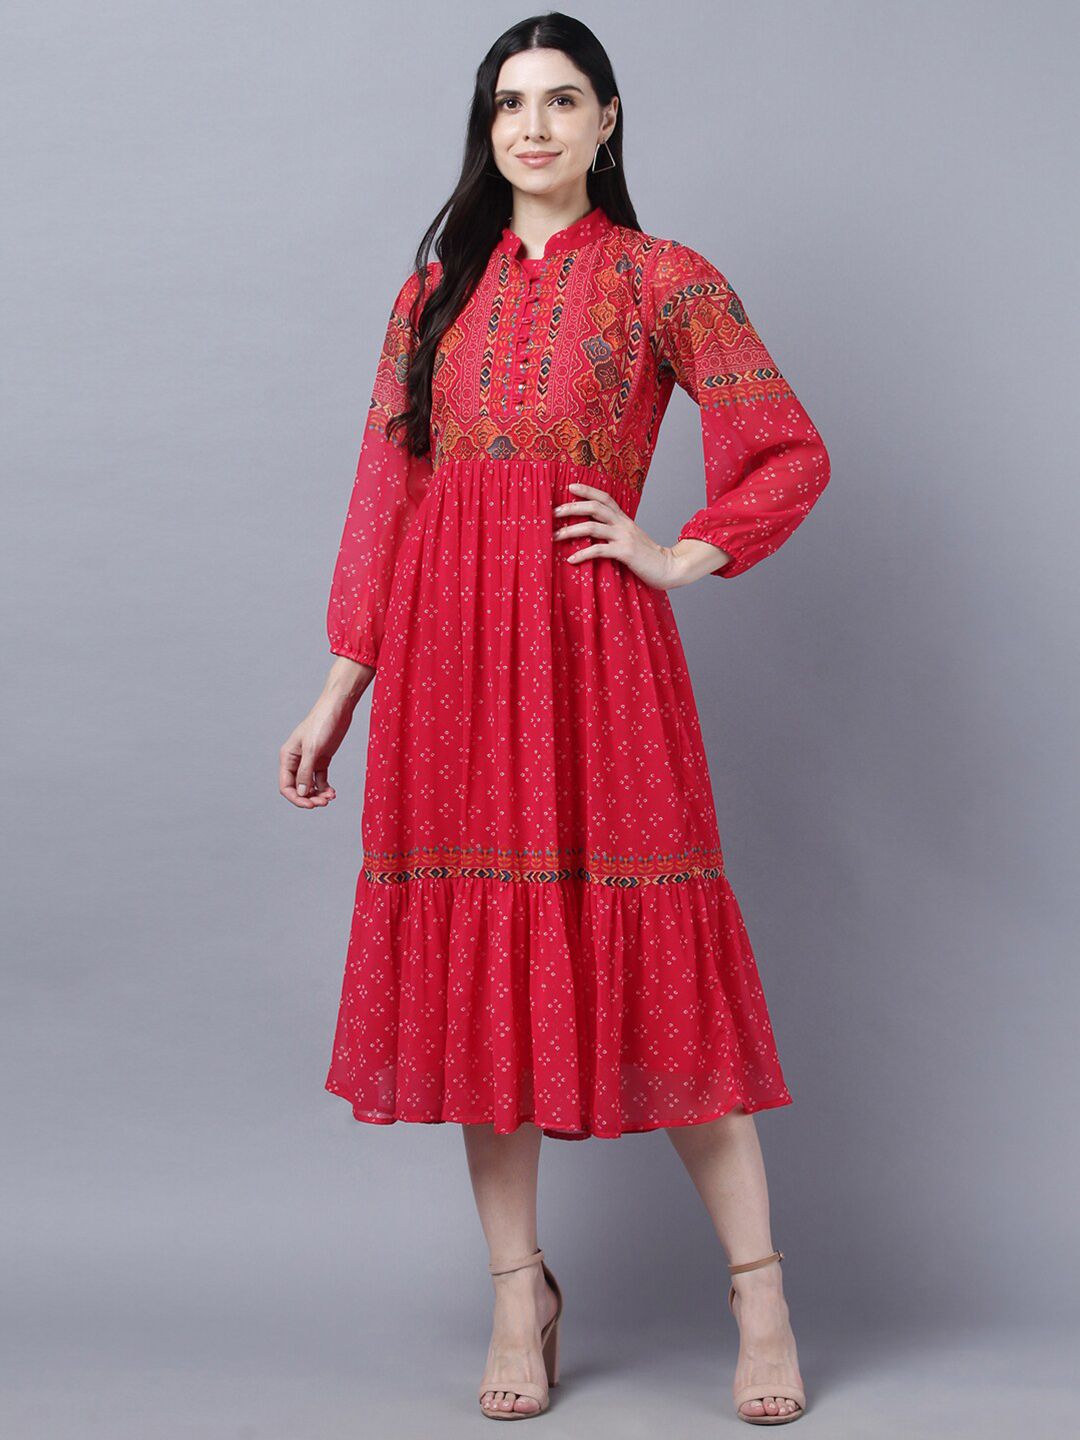 Myshka Women's Red Printed Floral Ethnic Flounce Midi Dress Price in India